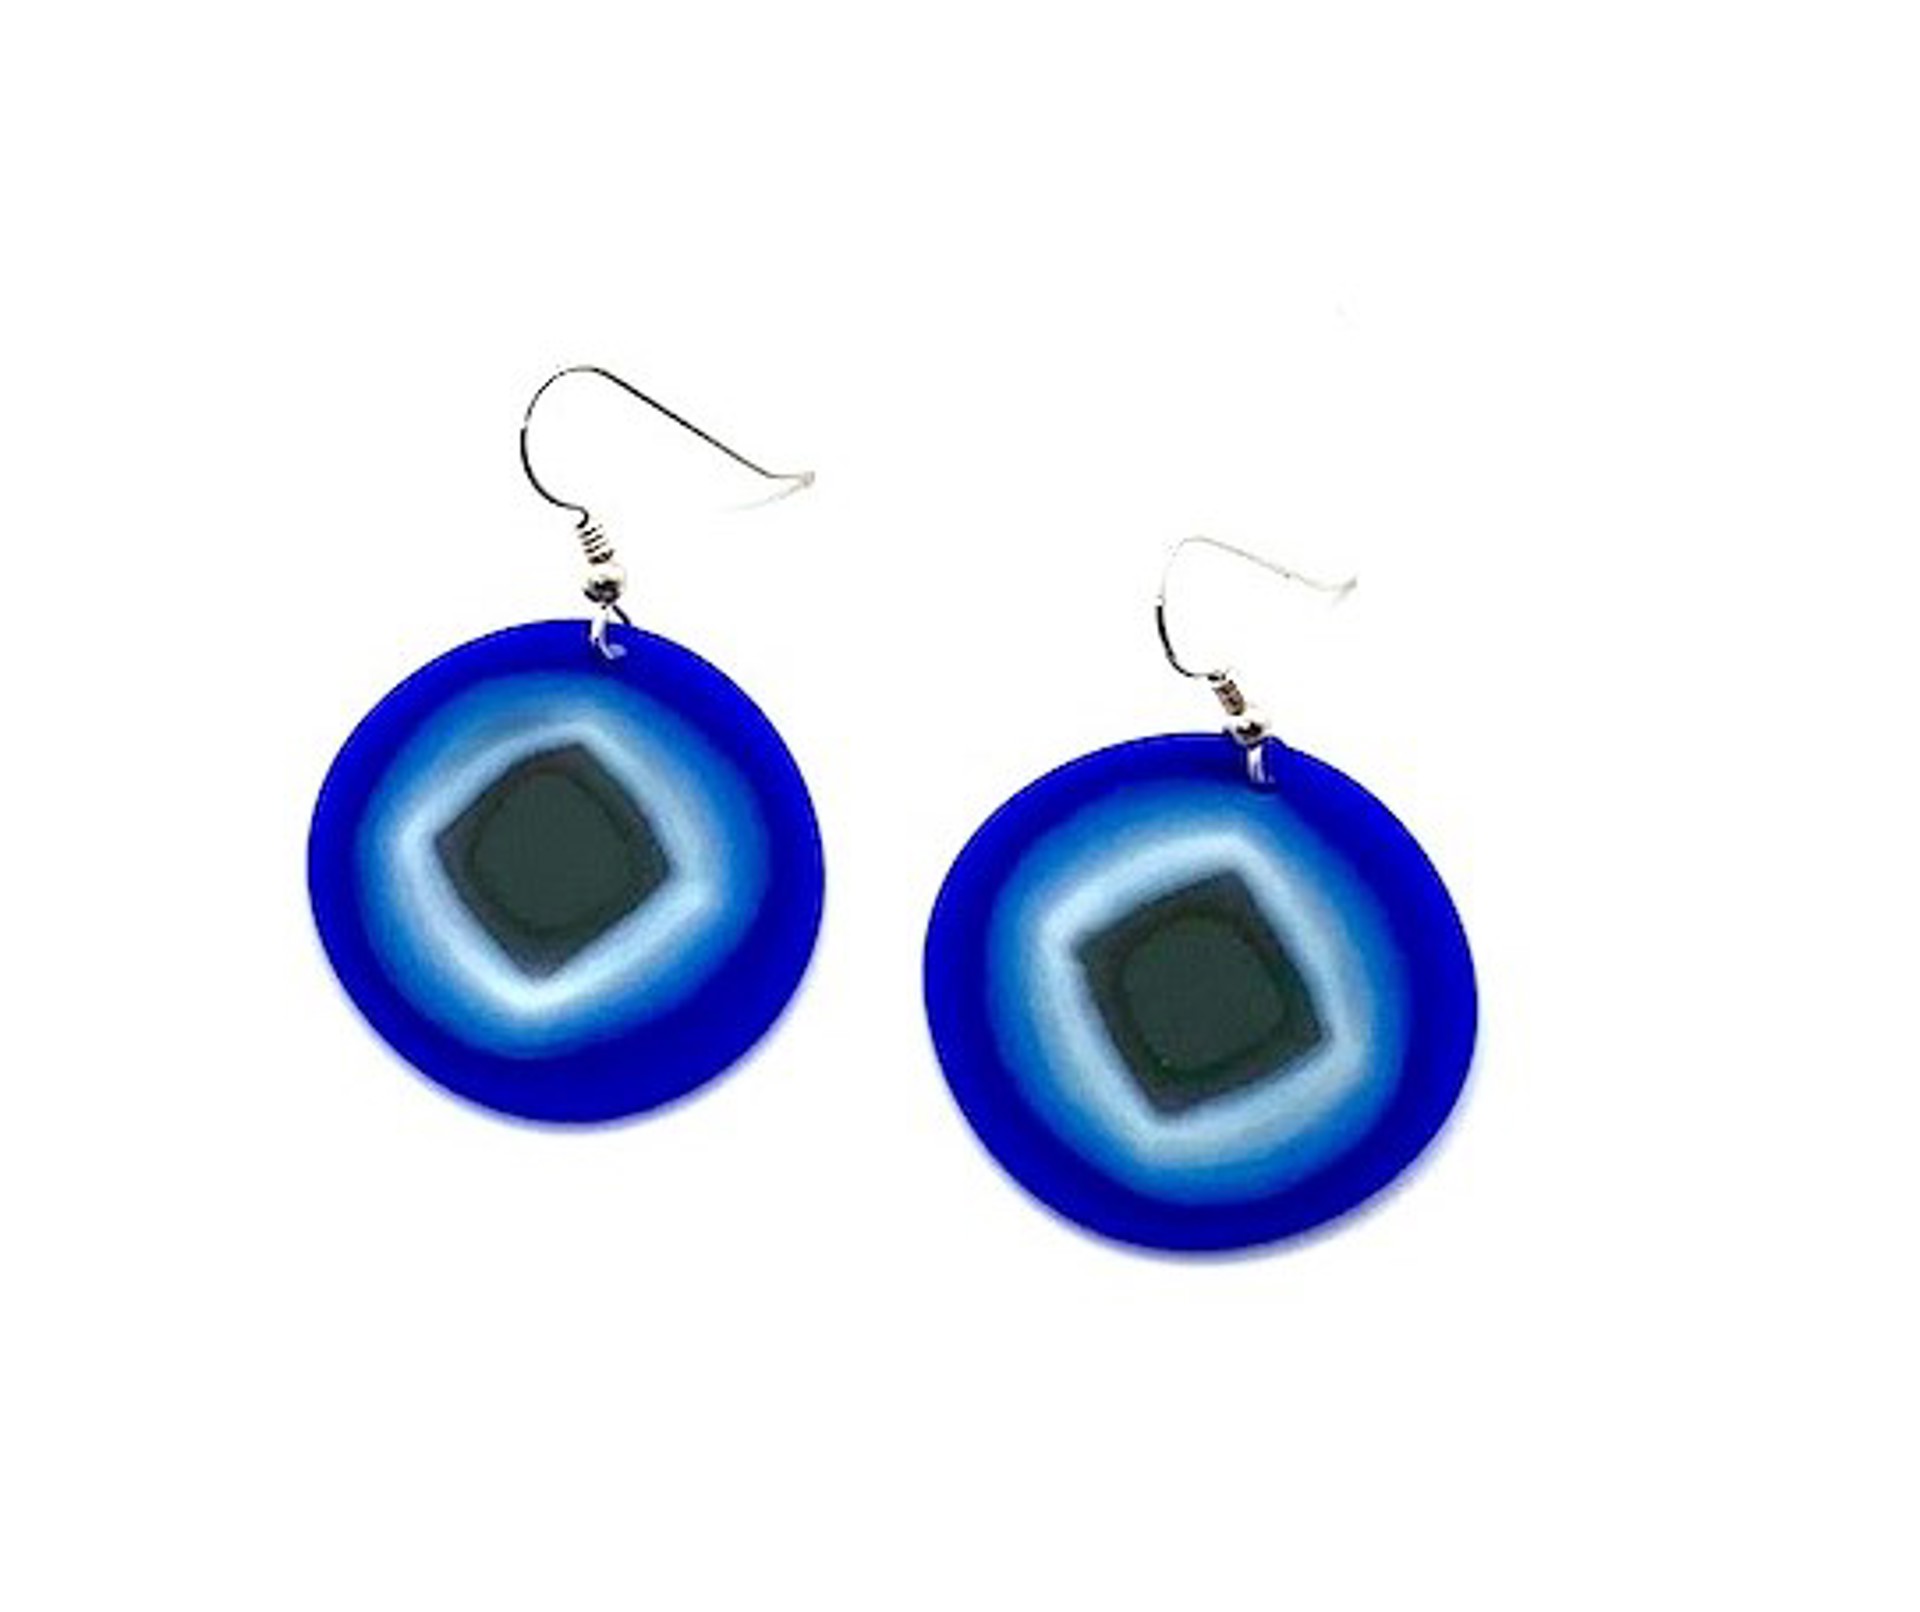 Compressed Glass Earrings - Blue/French Vanilla/ Slate Grey by Chris Cox